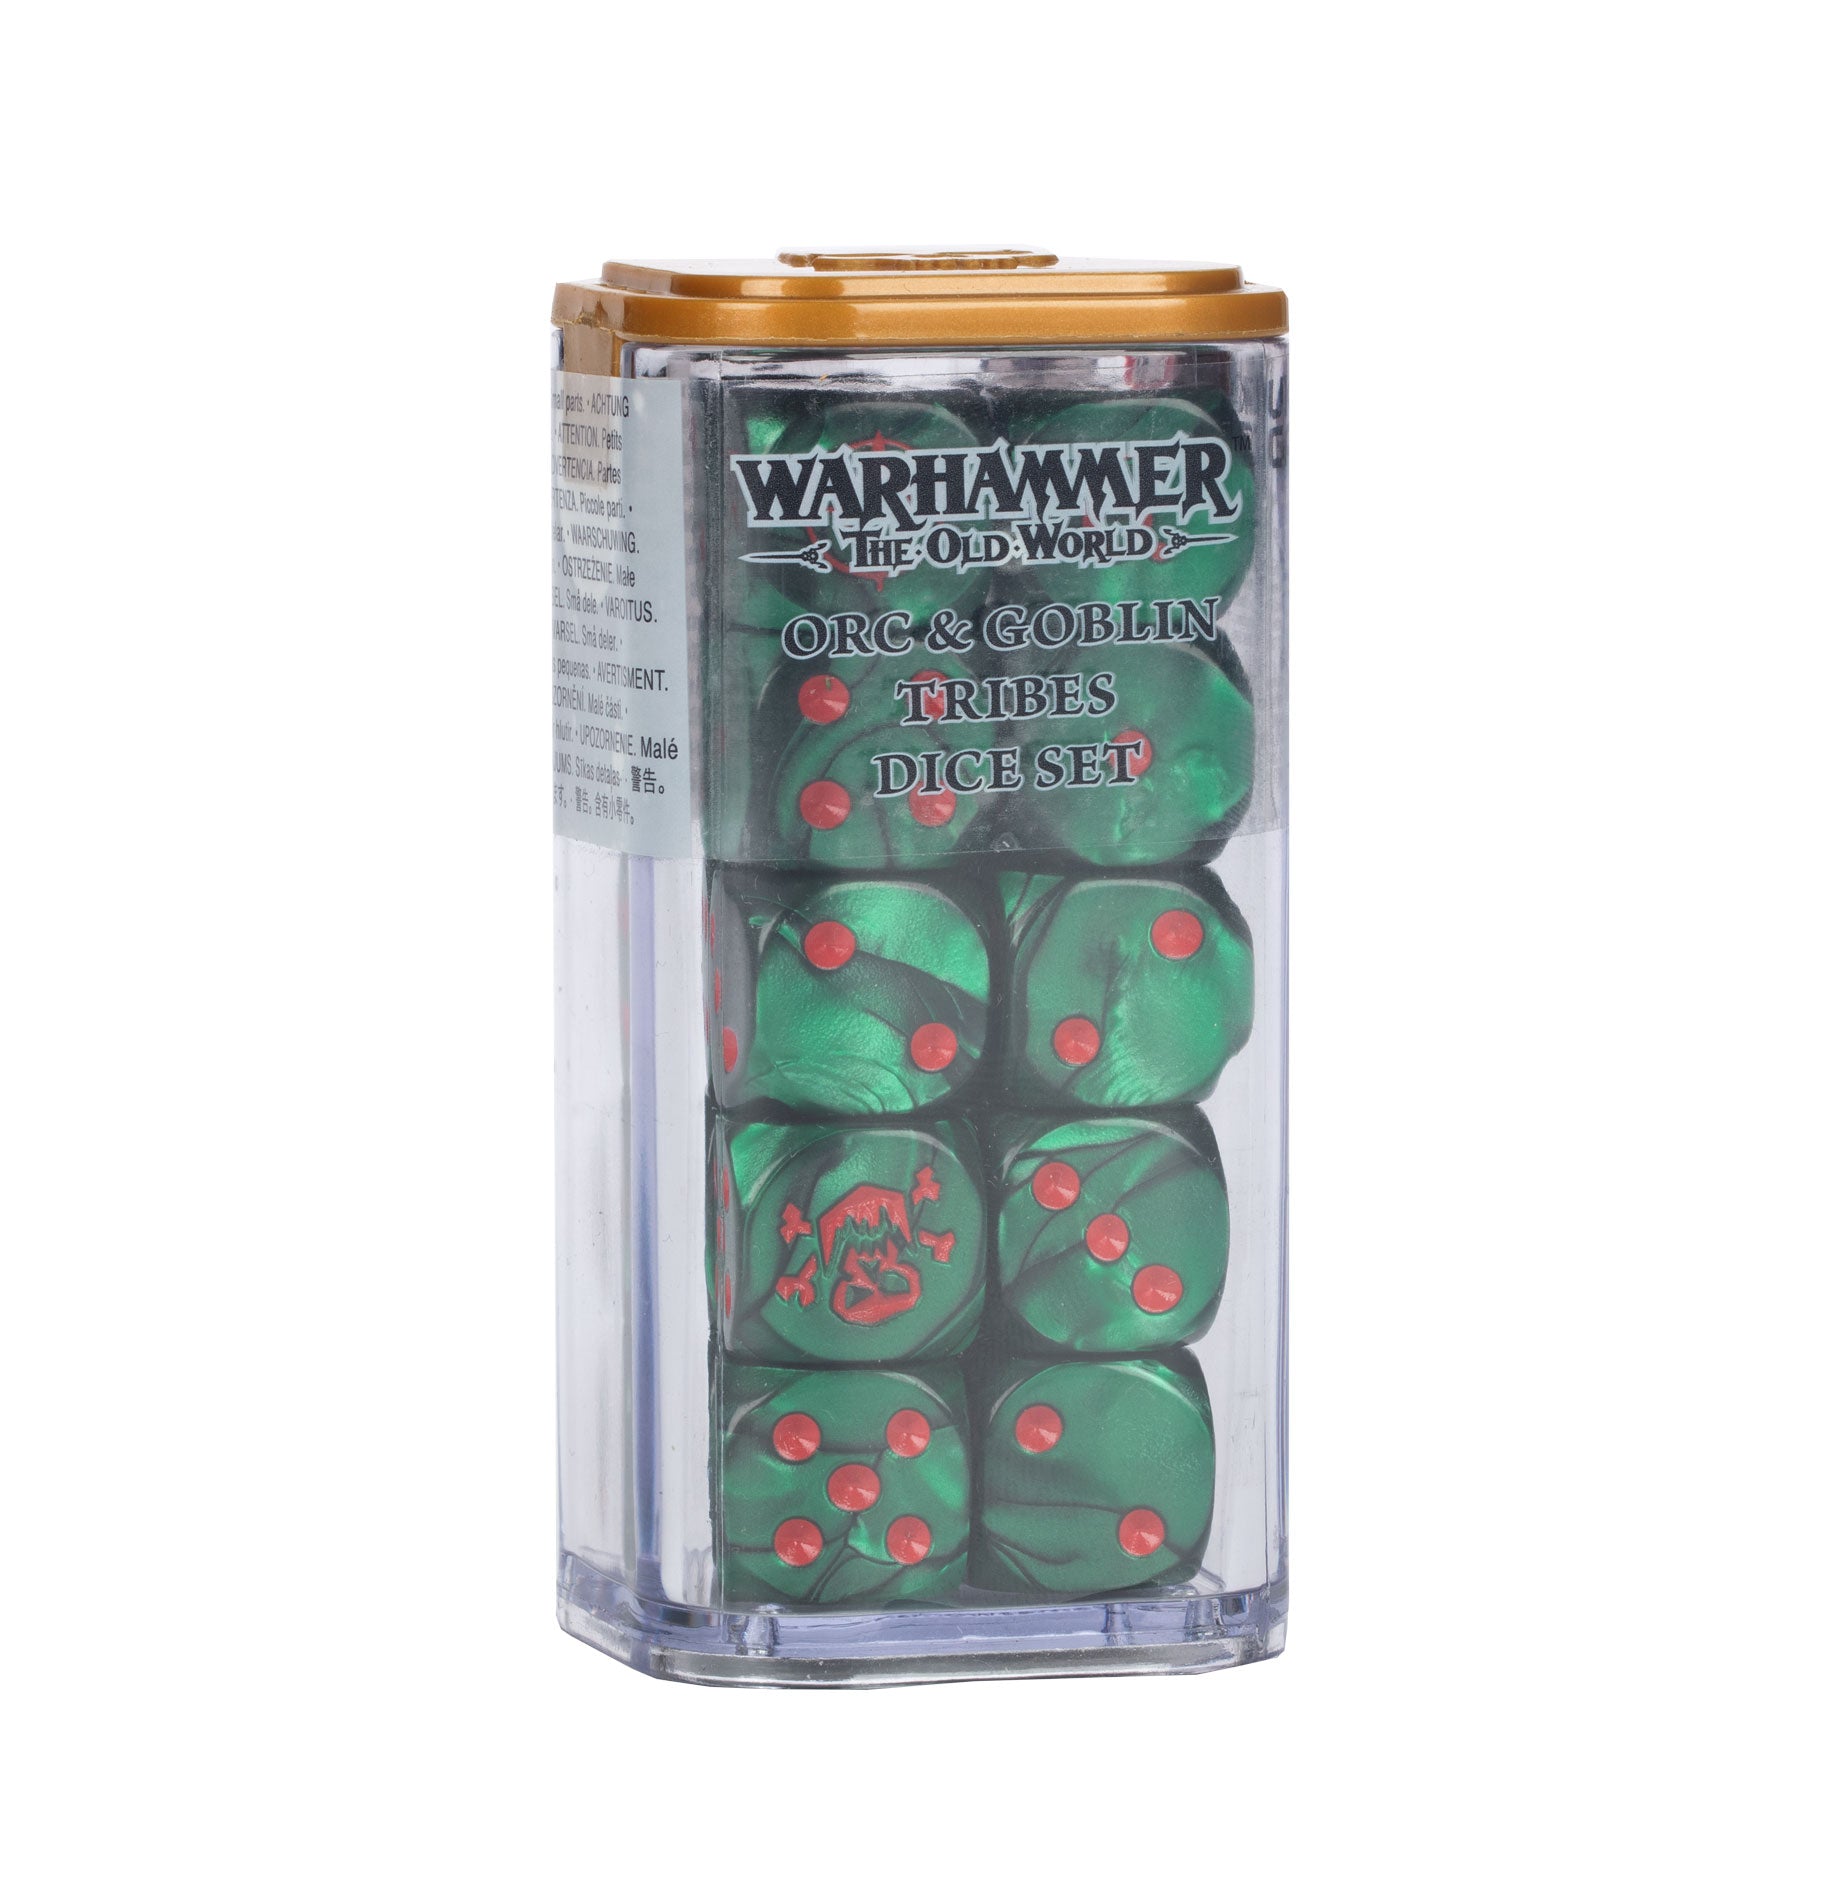 Warhammer: The Old World: Orc and Goblin Dice Set MKZWF9T15U |0|